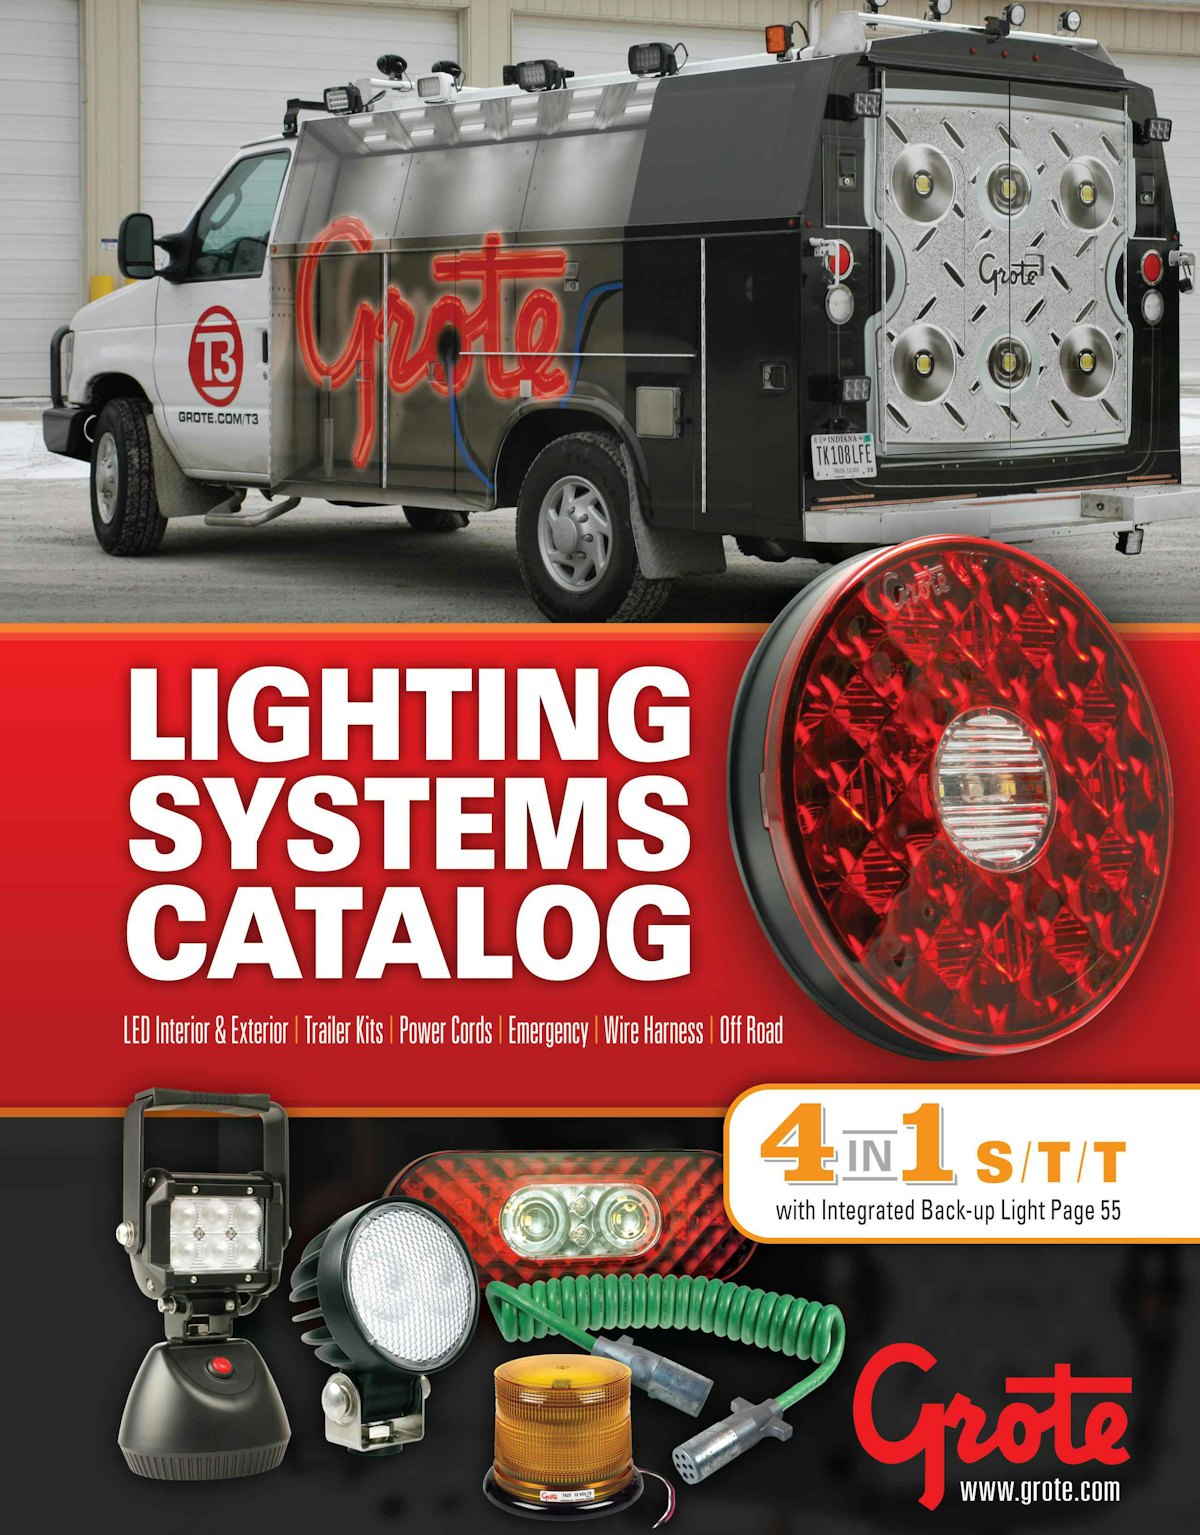 Grote releases 2016 lighting catalog